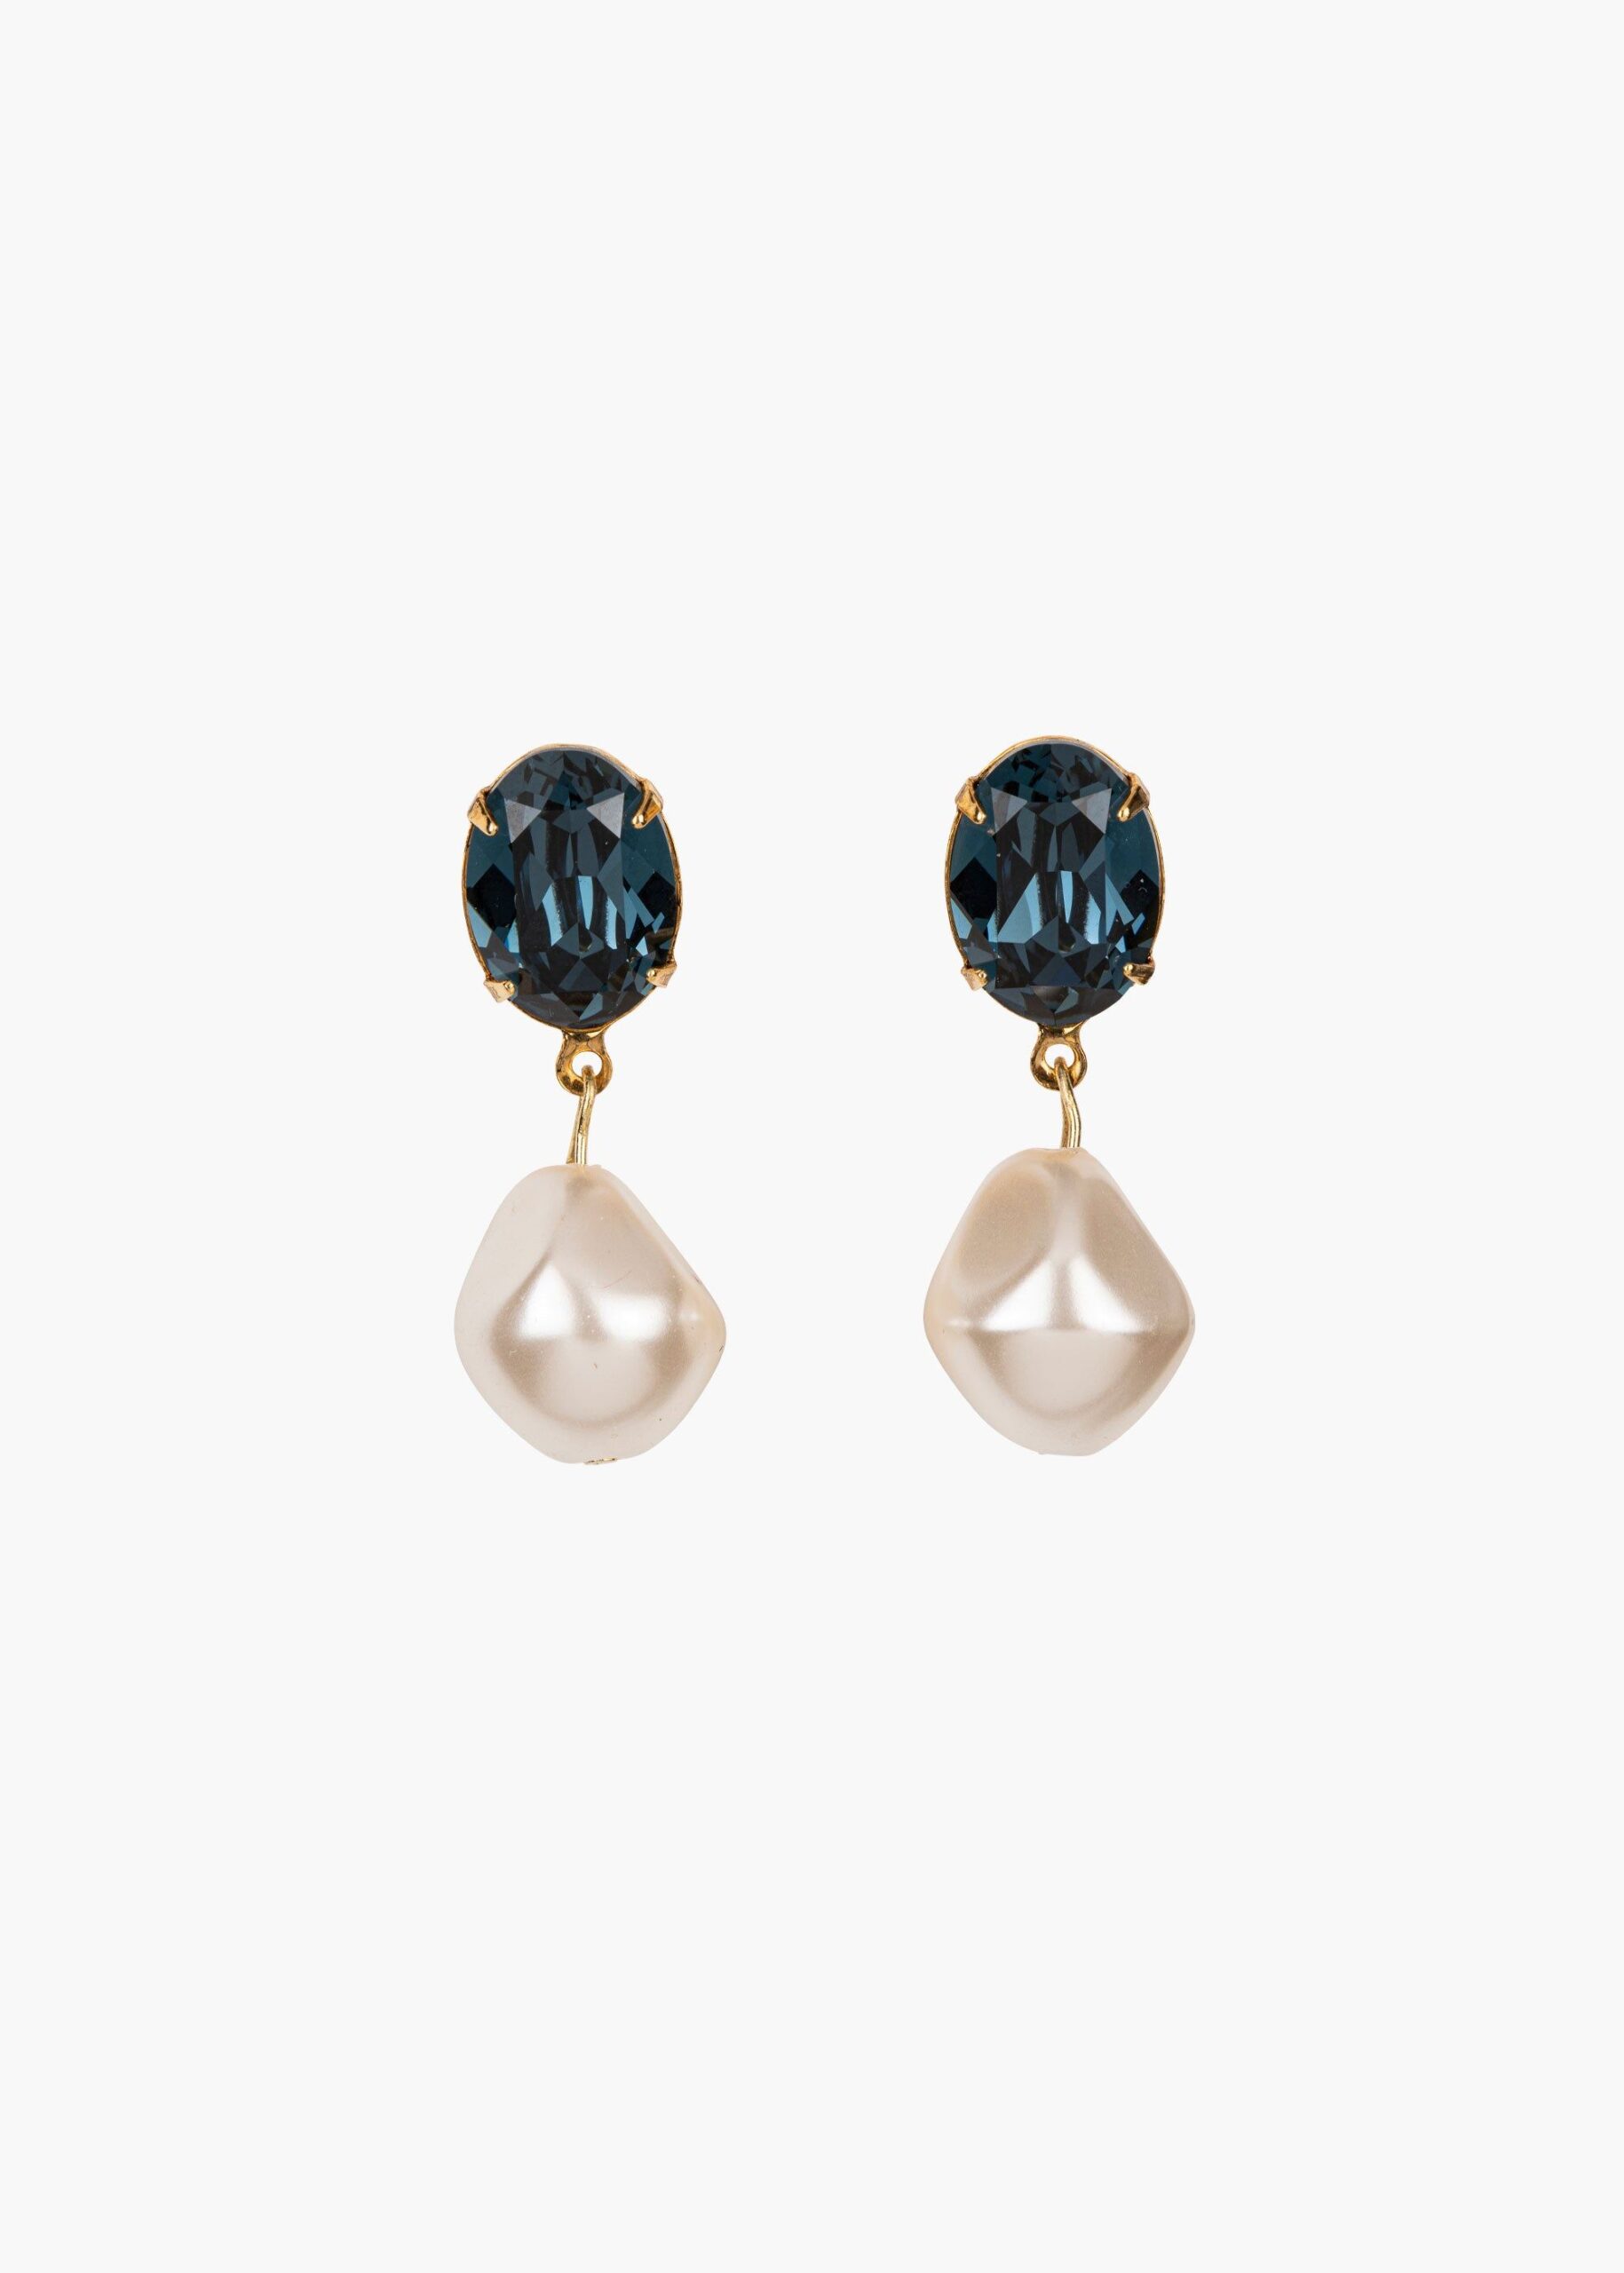 Elegant Adornments: Elevating Your Look with Sapphire Earrings